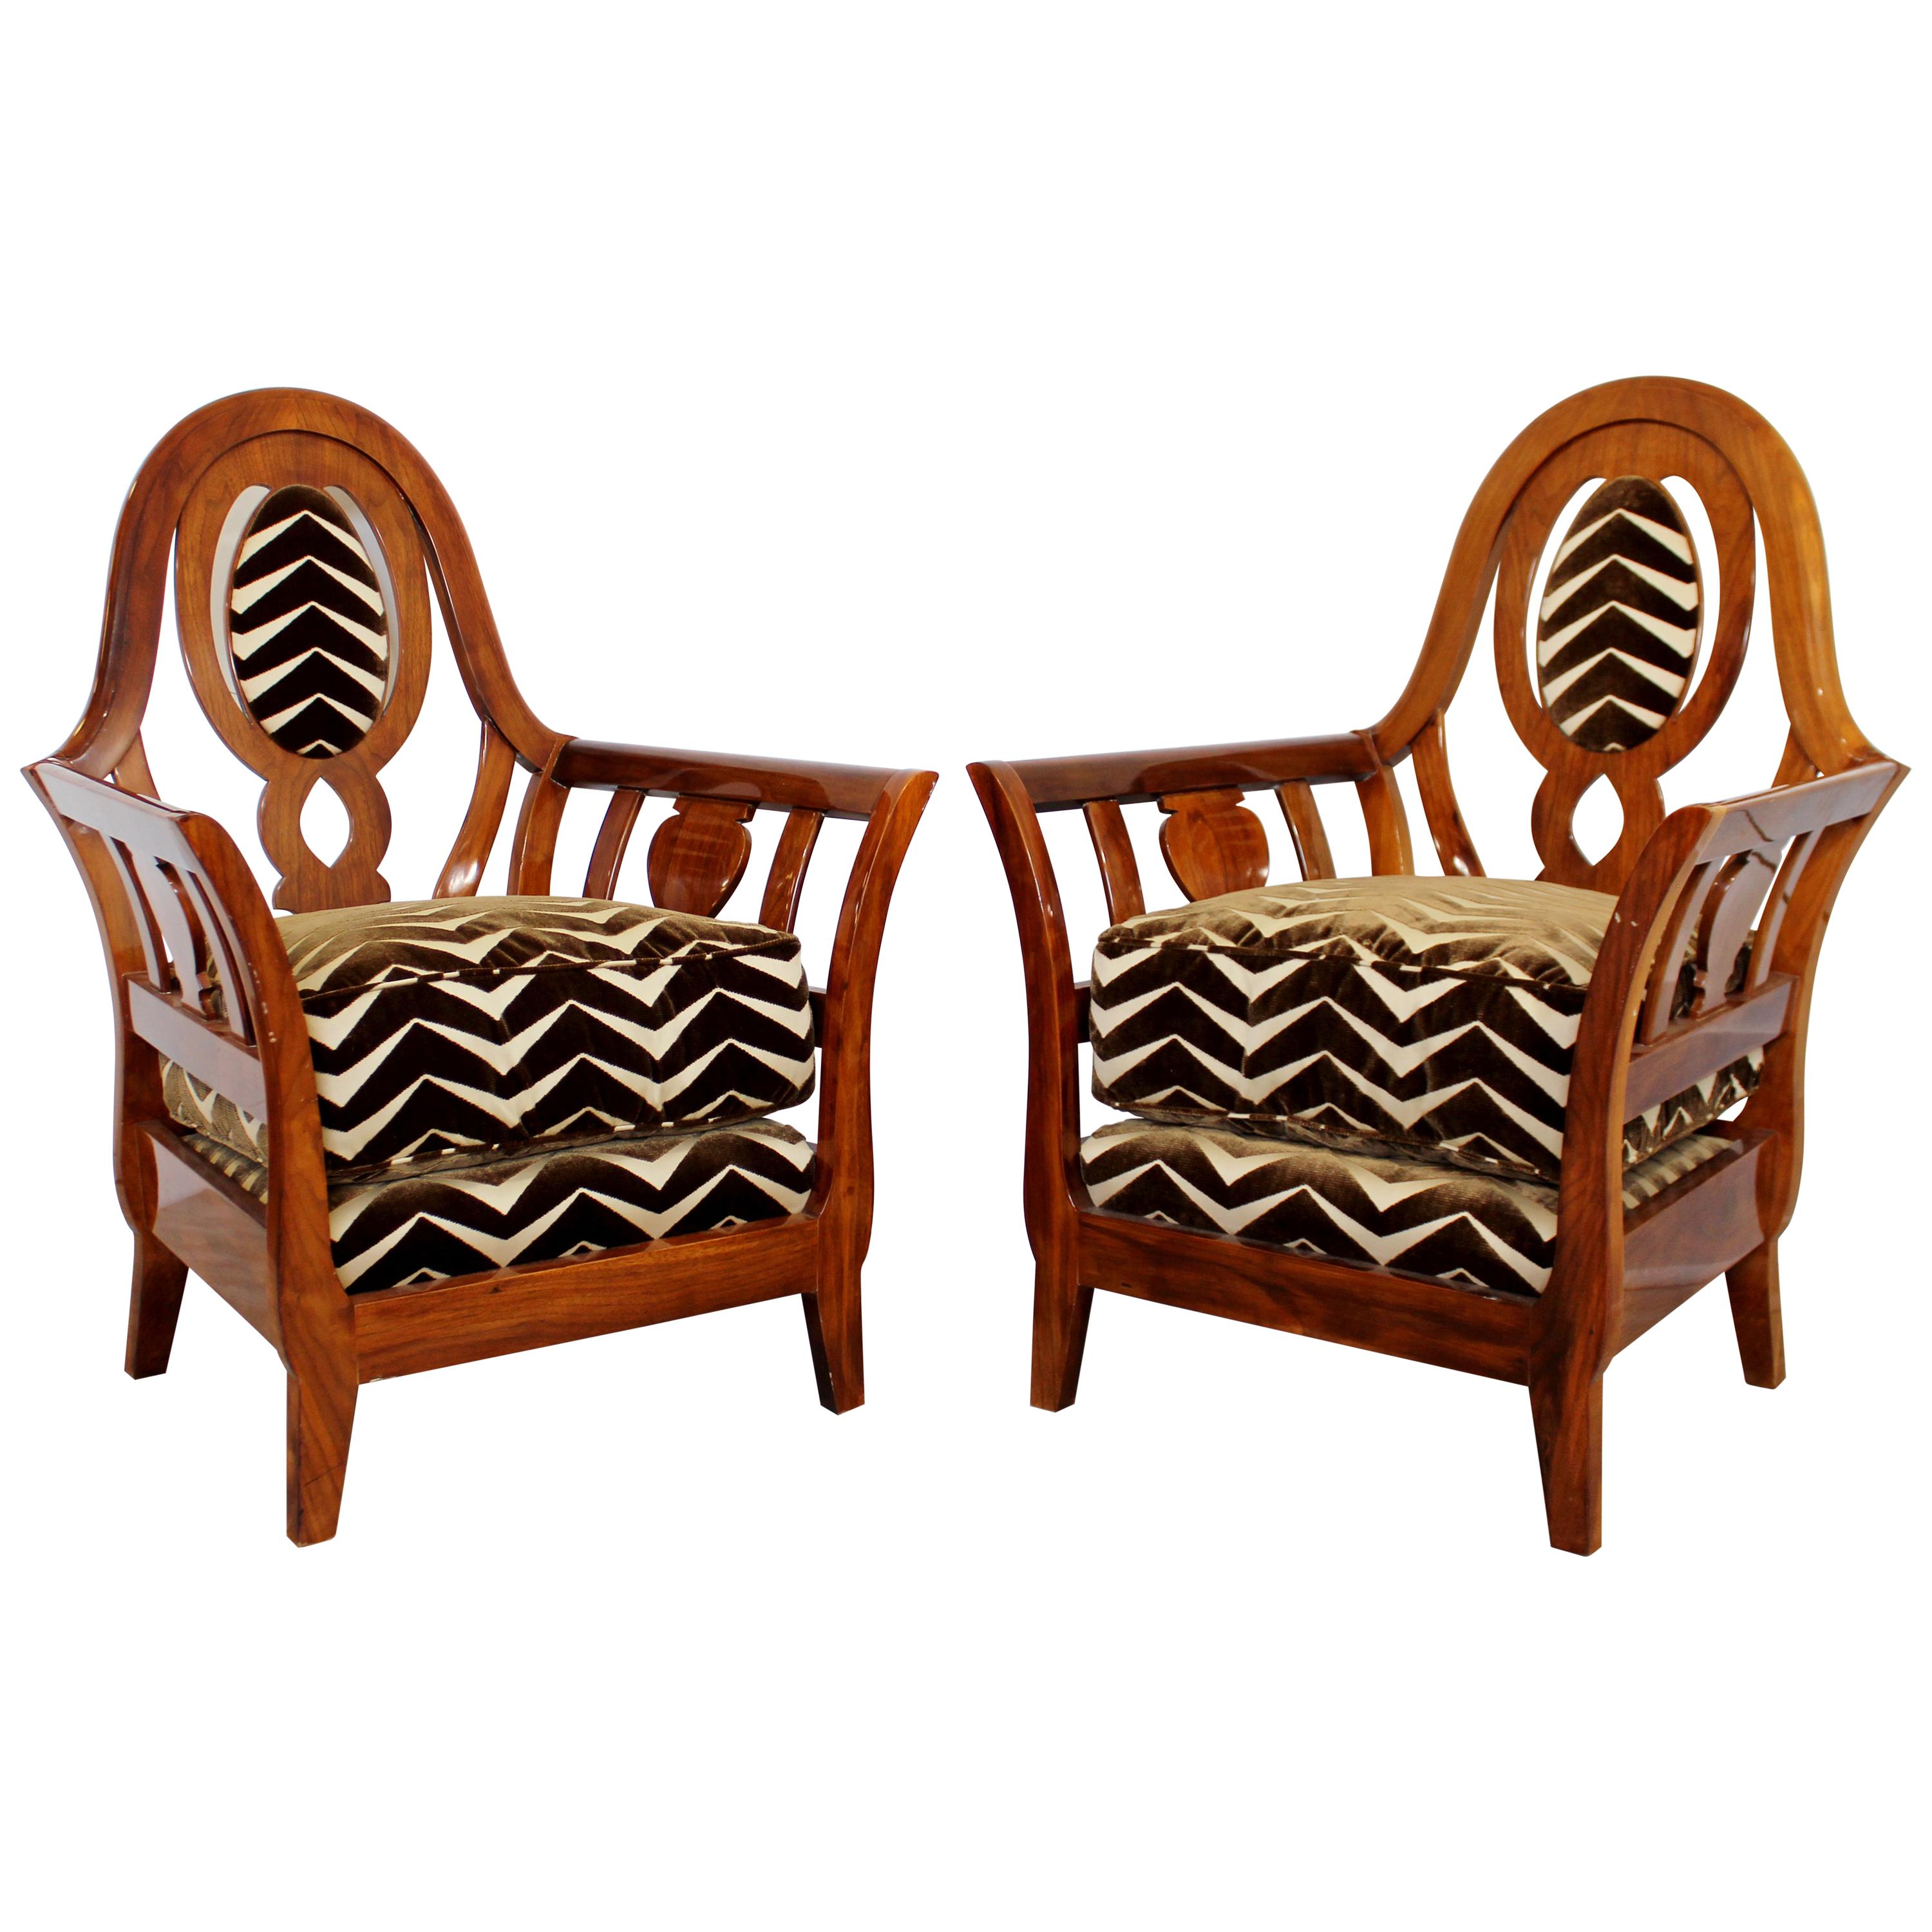 Contemporary Modern Pair of Art Deco Style Zebra Print Studio Curved Armchairs